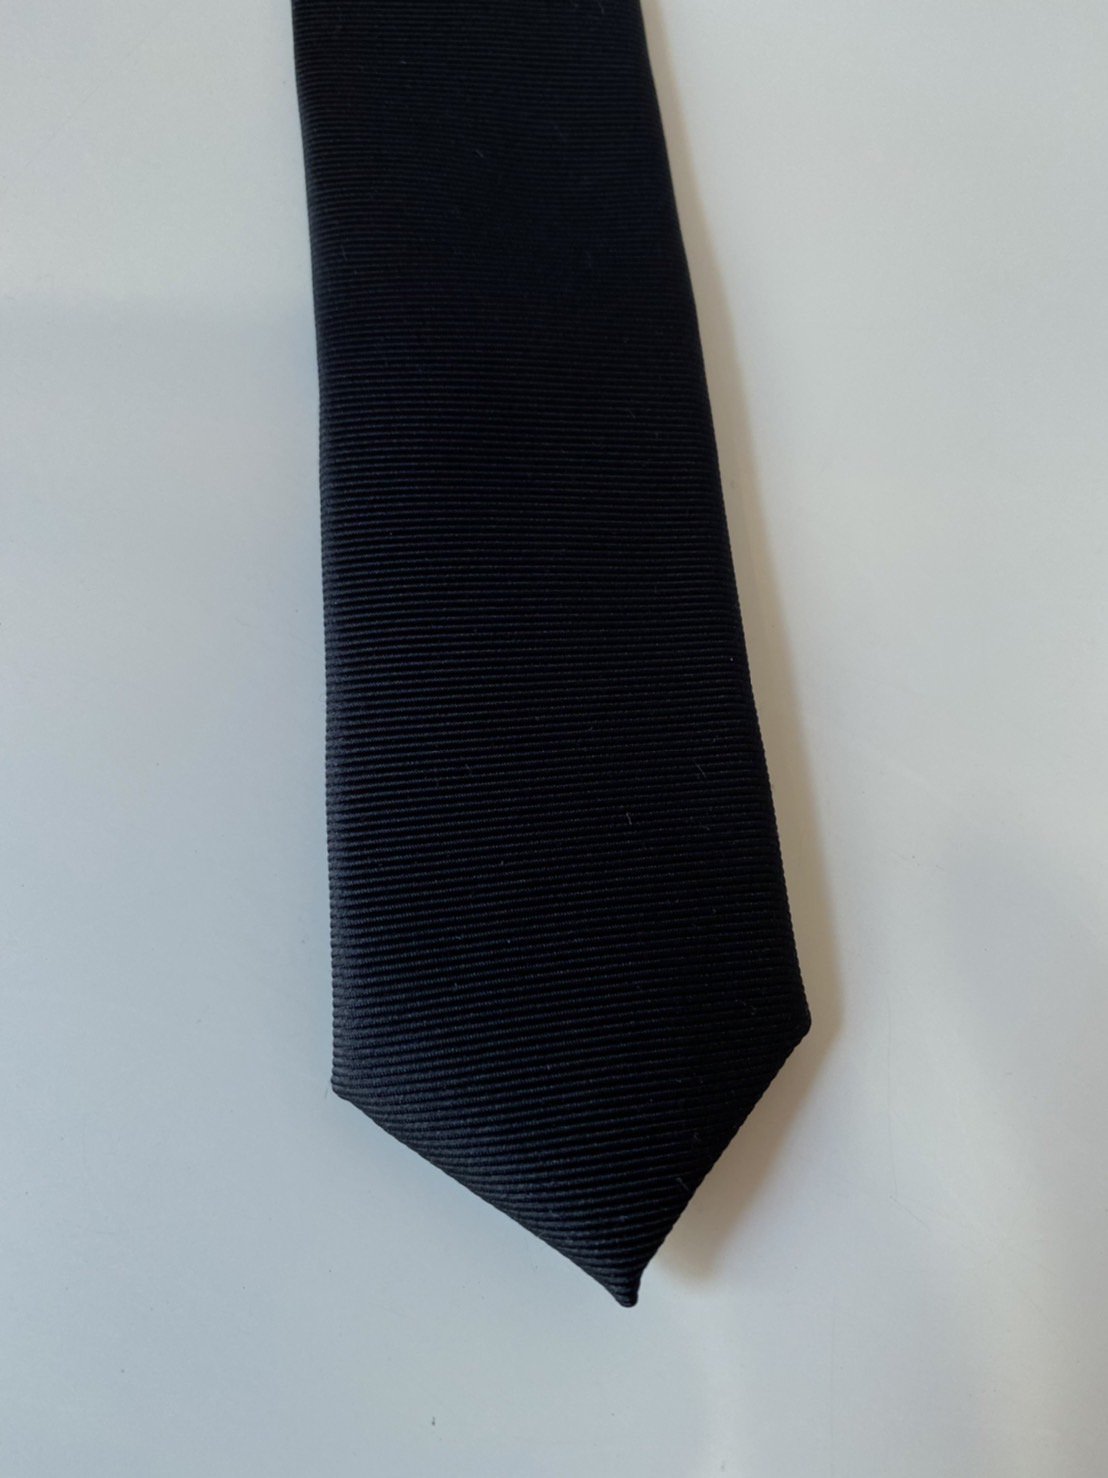 LITTLEBIG<br />Silk Narrow Tie / Black&White<img class='new_mark_img2' src='https://img.shop-pro.jp/img/new/icons14.gif' style='border:none;display:inline;margin:0px;padding:0px;width:auto;' />